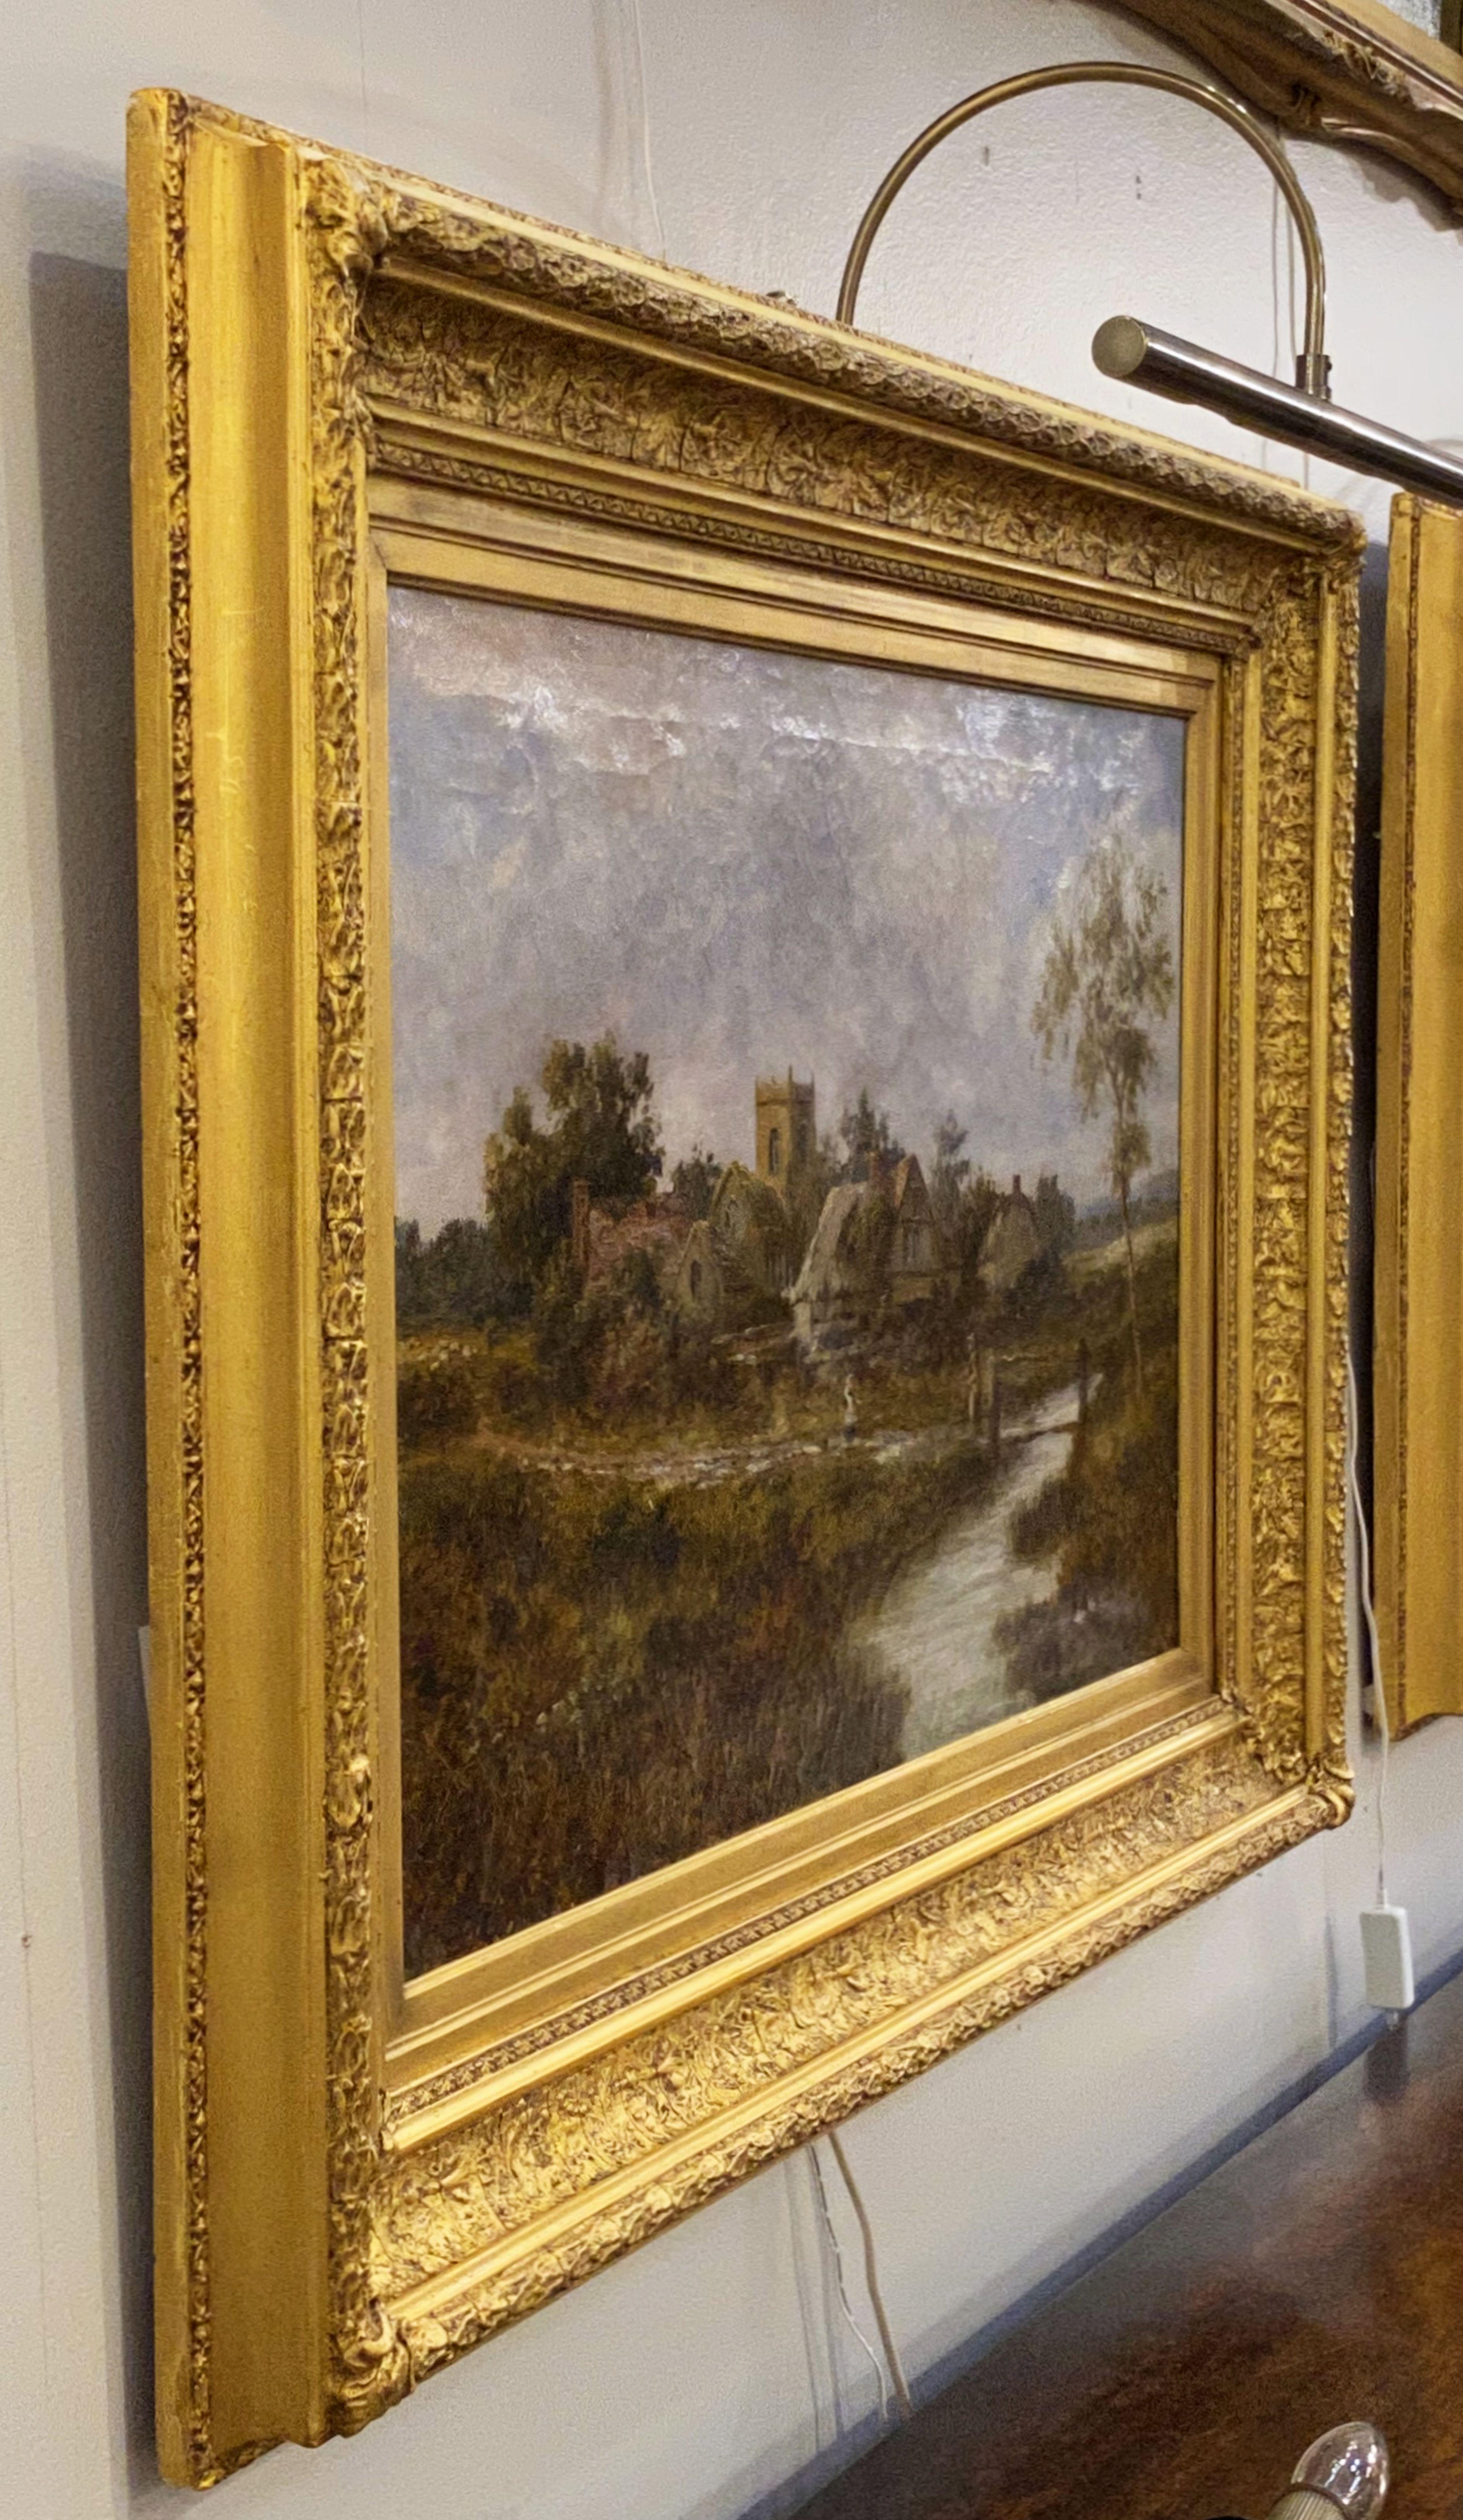 A fine large rectangular English oil painting on canvas in a giltwood frame, featuring an English country landscape with tower.

Signed: A. Watts 1908

Dimensions:
H 30.25 in. x W 40.25 in. x D 2.25 in.